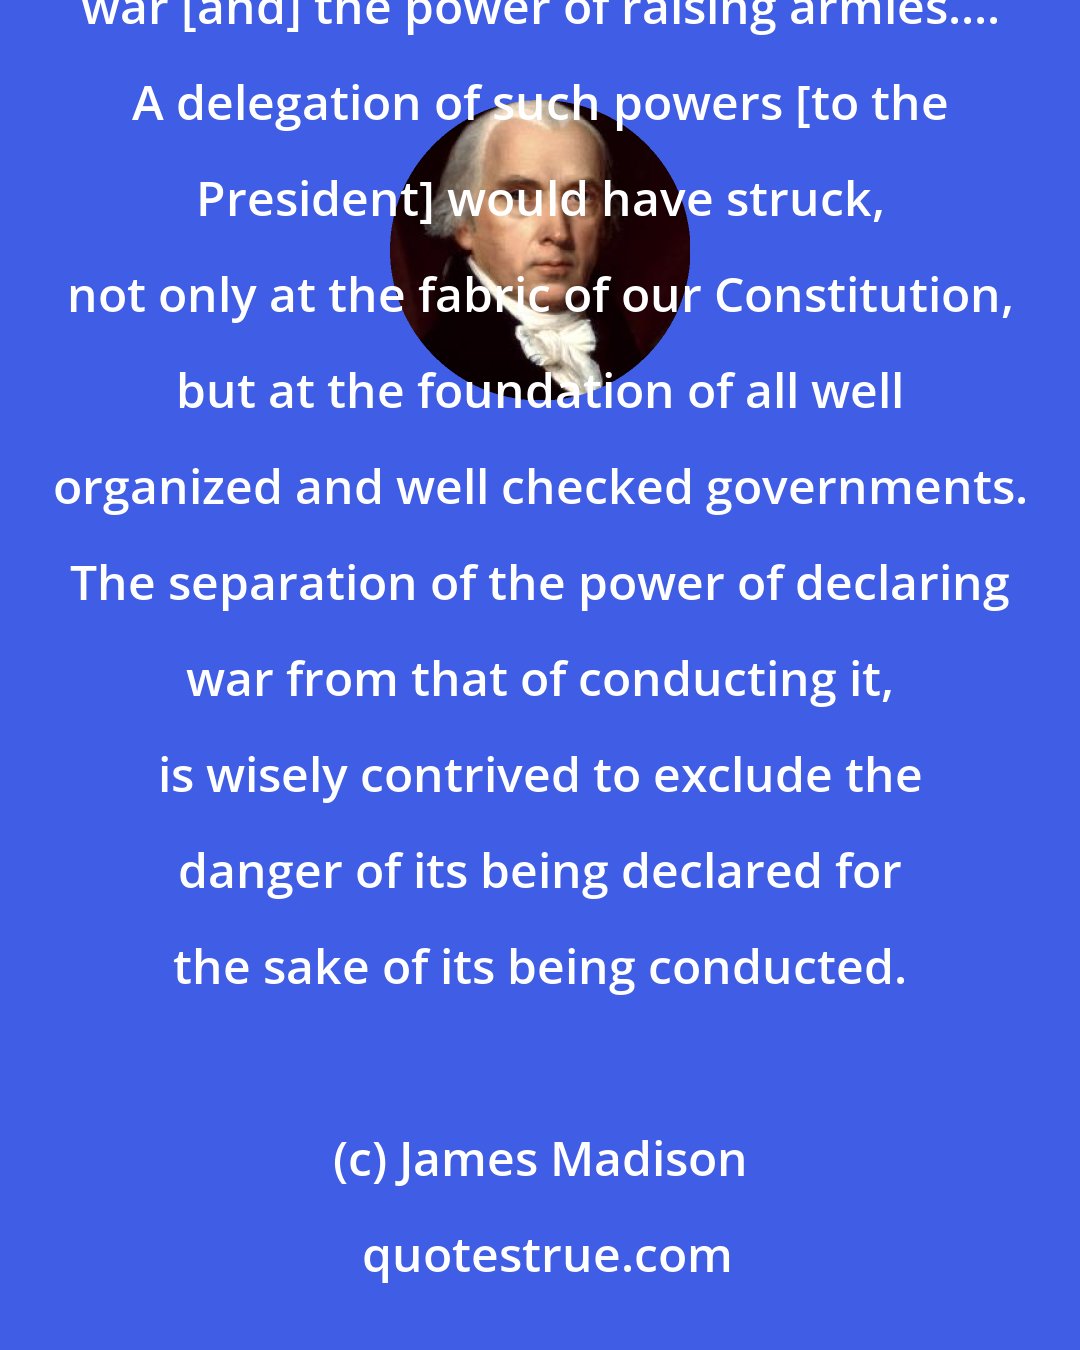 James Madison: The Constitution expressly and exclusively vests in the Legislature the power of declaring a state of war [and] the power of raising armies.... A delegation of such powers [to the President] would have struck, not only at the fabric of our Constitution, but at the foundation of all well organized and well checked governments. The separation of the power of declaring war from that of conducting it, is wisely contrived to exclude the danger of its being declared for the sake of its being conducted.